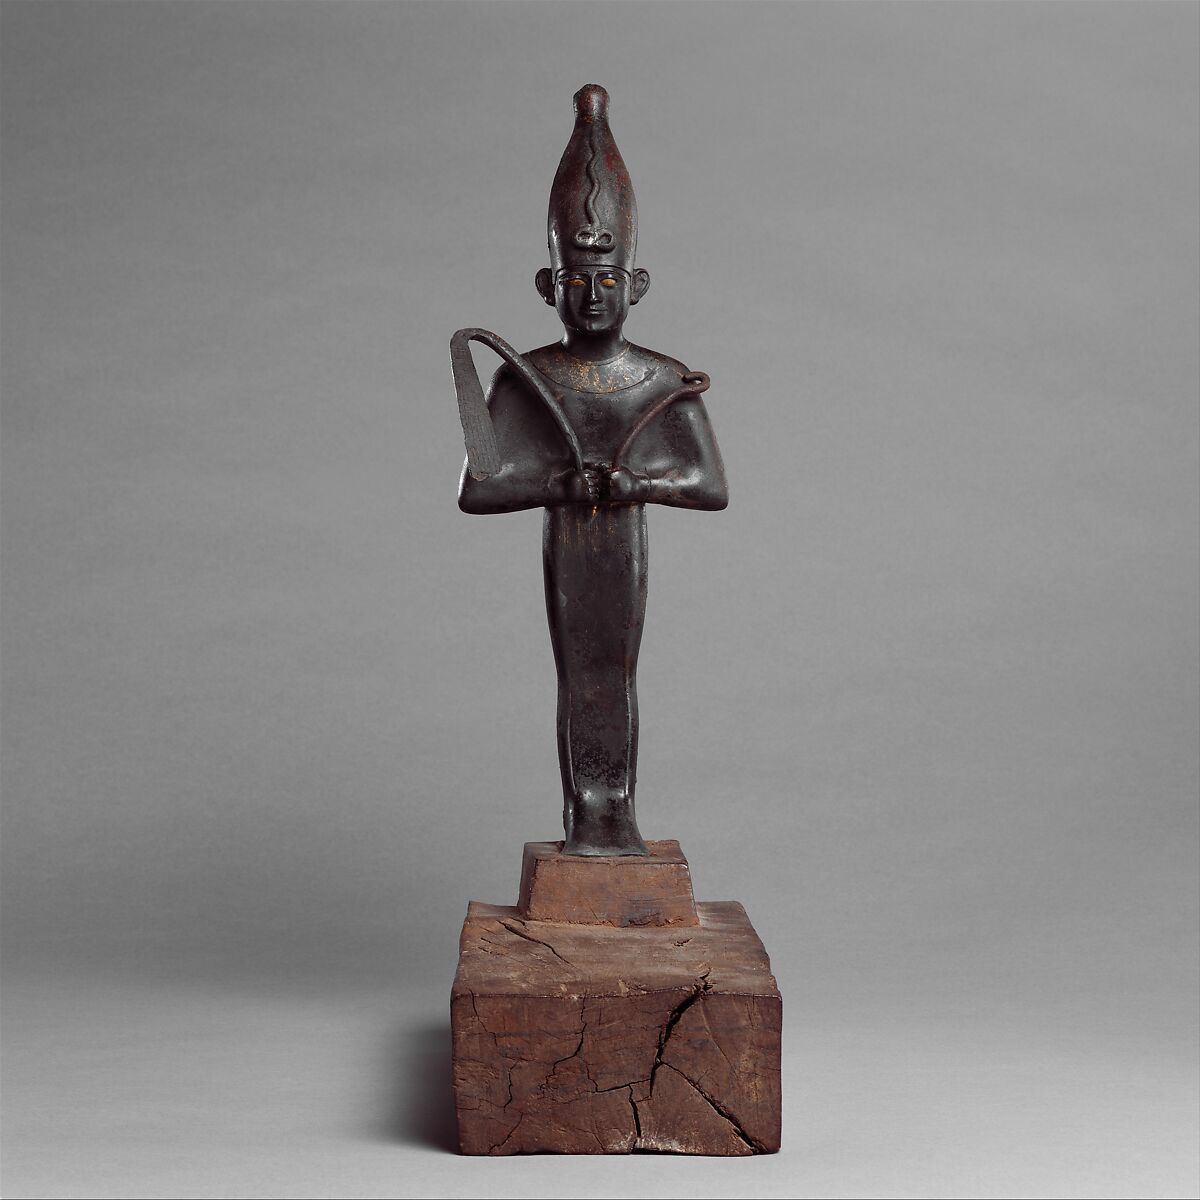 Osiris offered by the Astronomer of the House of Amun, Ibeb, Leaded bronze; precious-metal leaf; inlays of other materials; wood base with ink or black paint inscription 